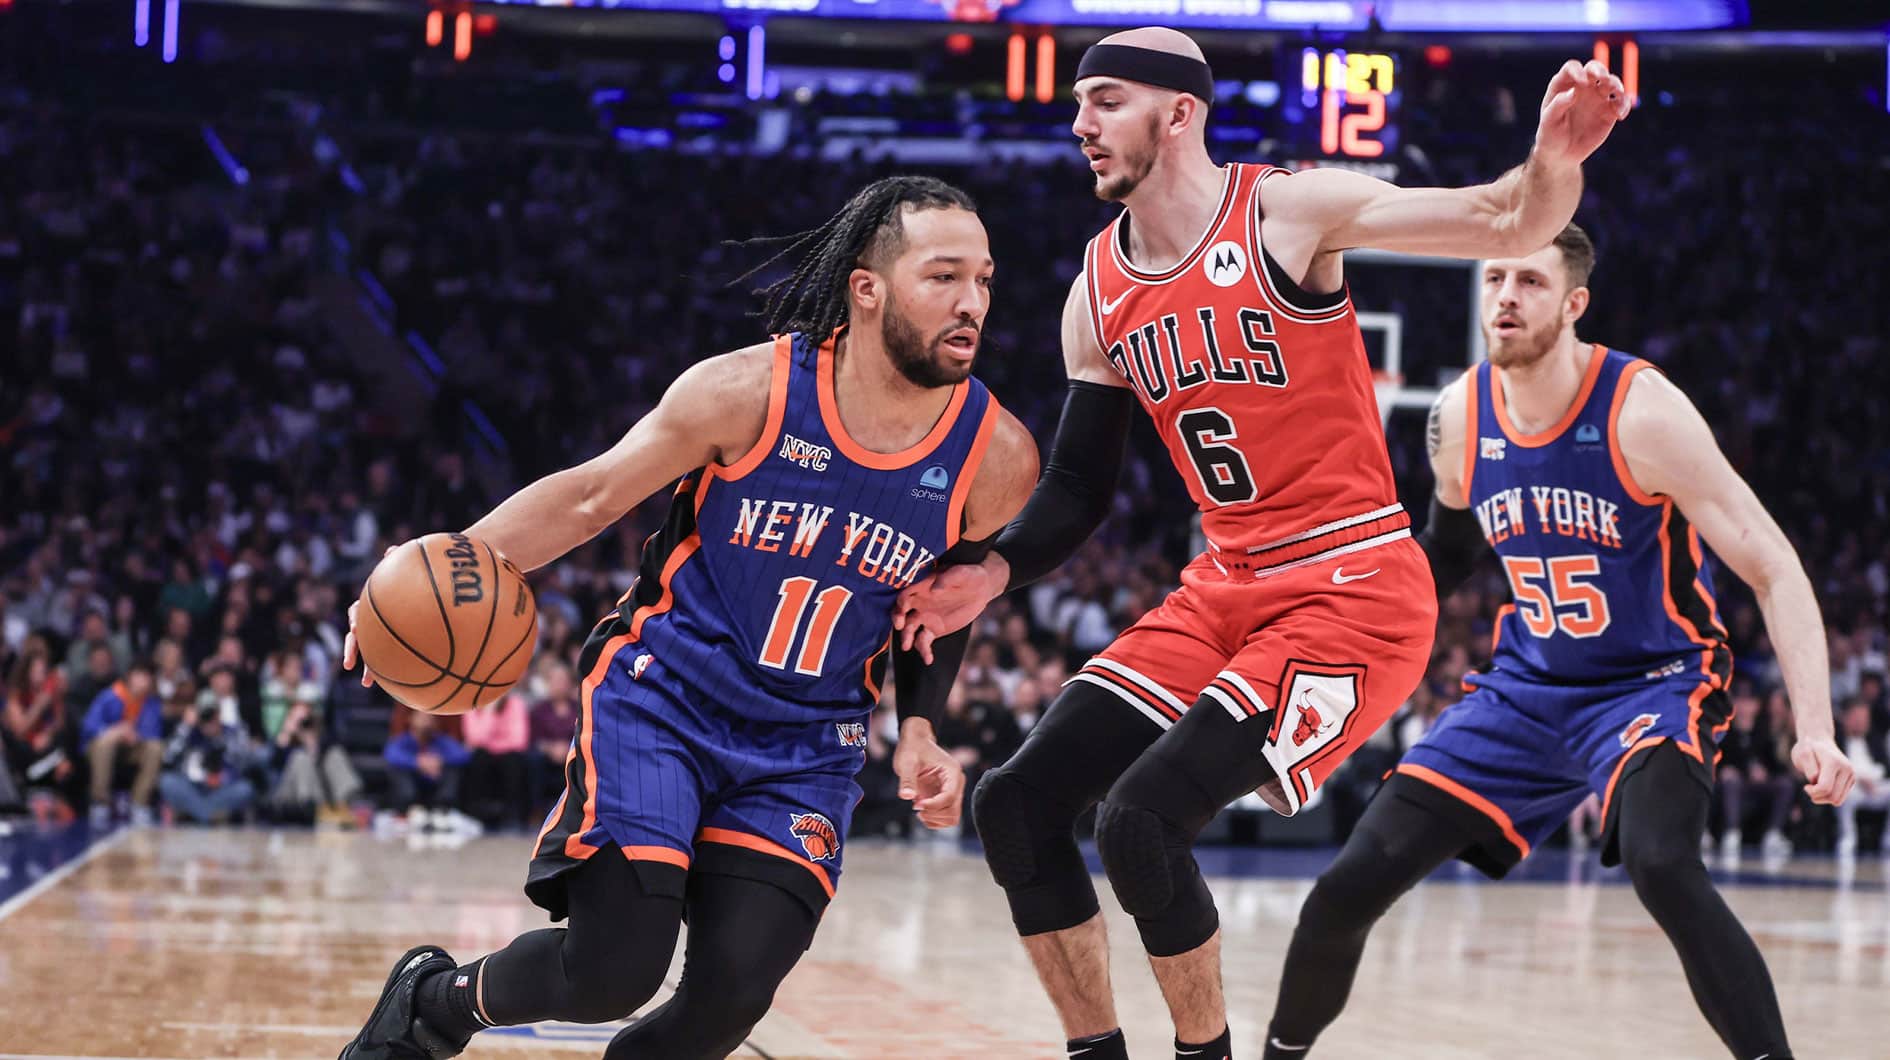 New York Knicks guard Jalen Brunson (11) drives past Chicago Bulls guard Alex Caruso (6) in the first quarter at Madison Square Garden